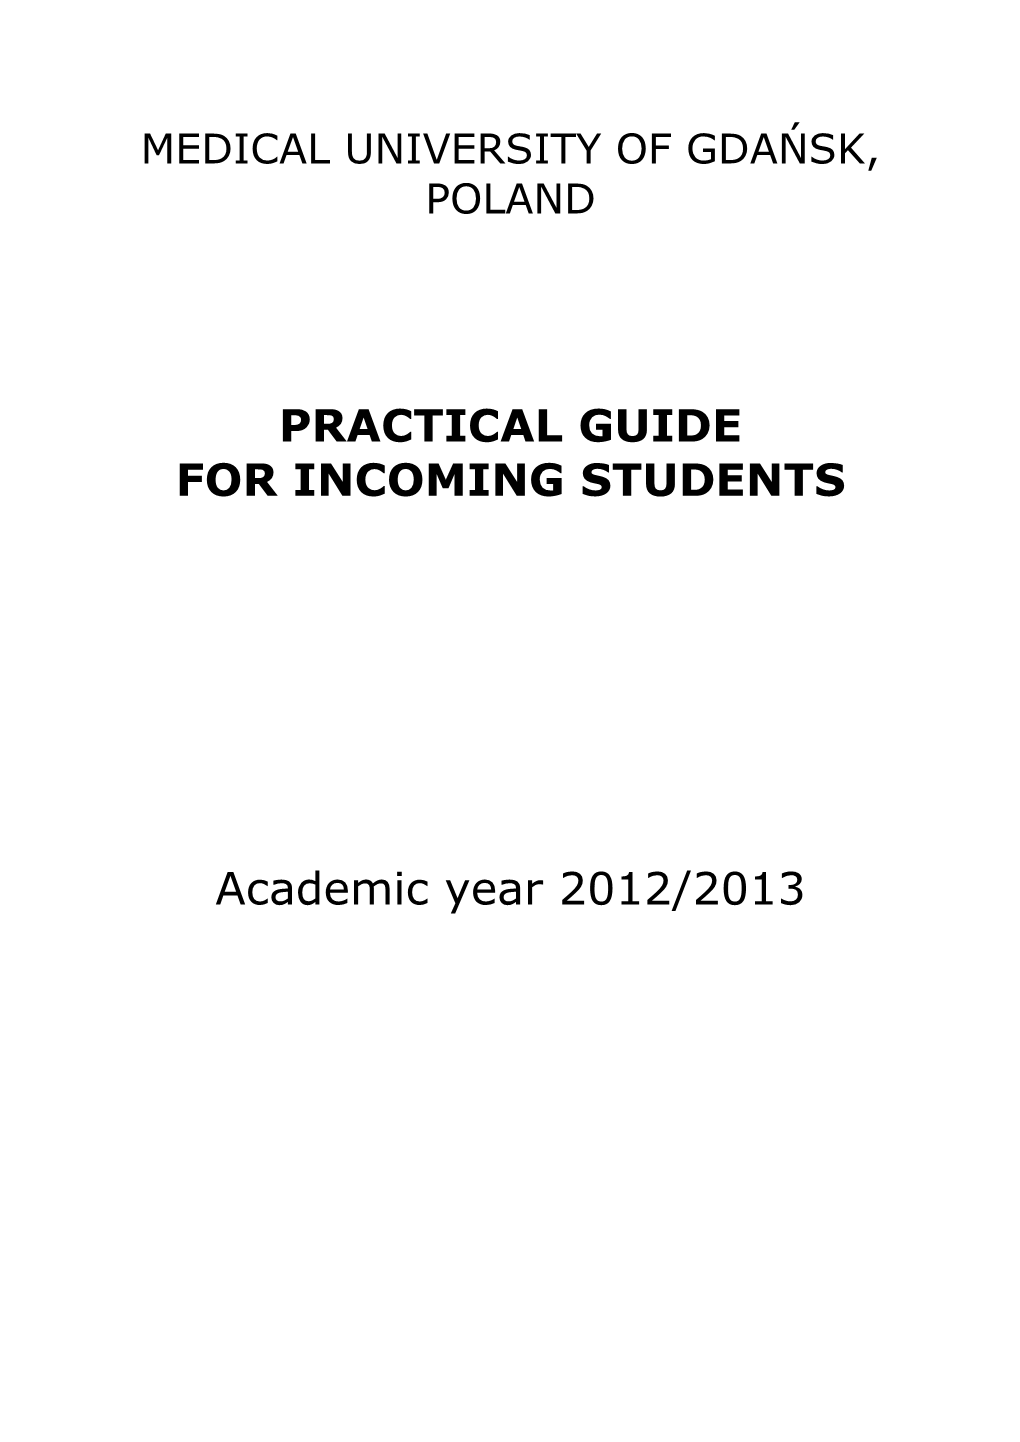 PRACTICAL GUIDE for INCOMING STUDENTS Academic Year 2012